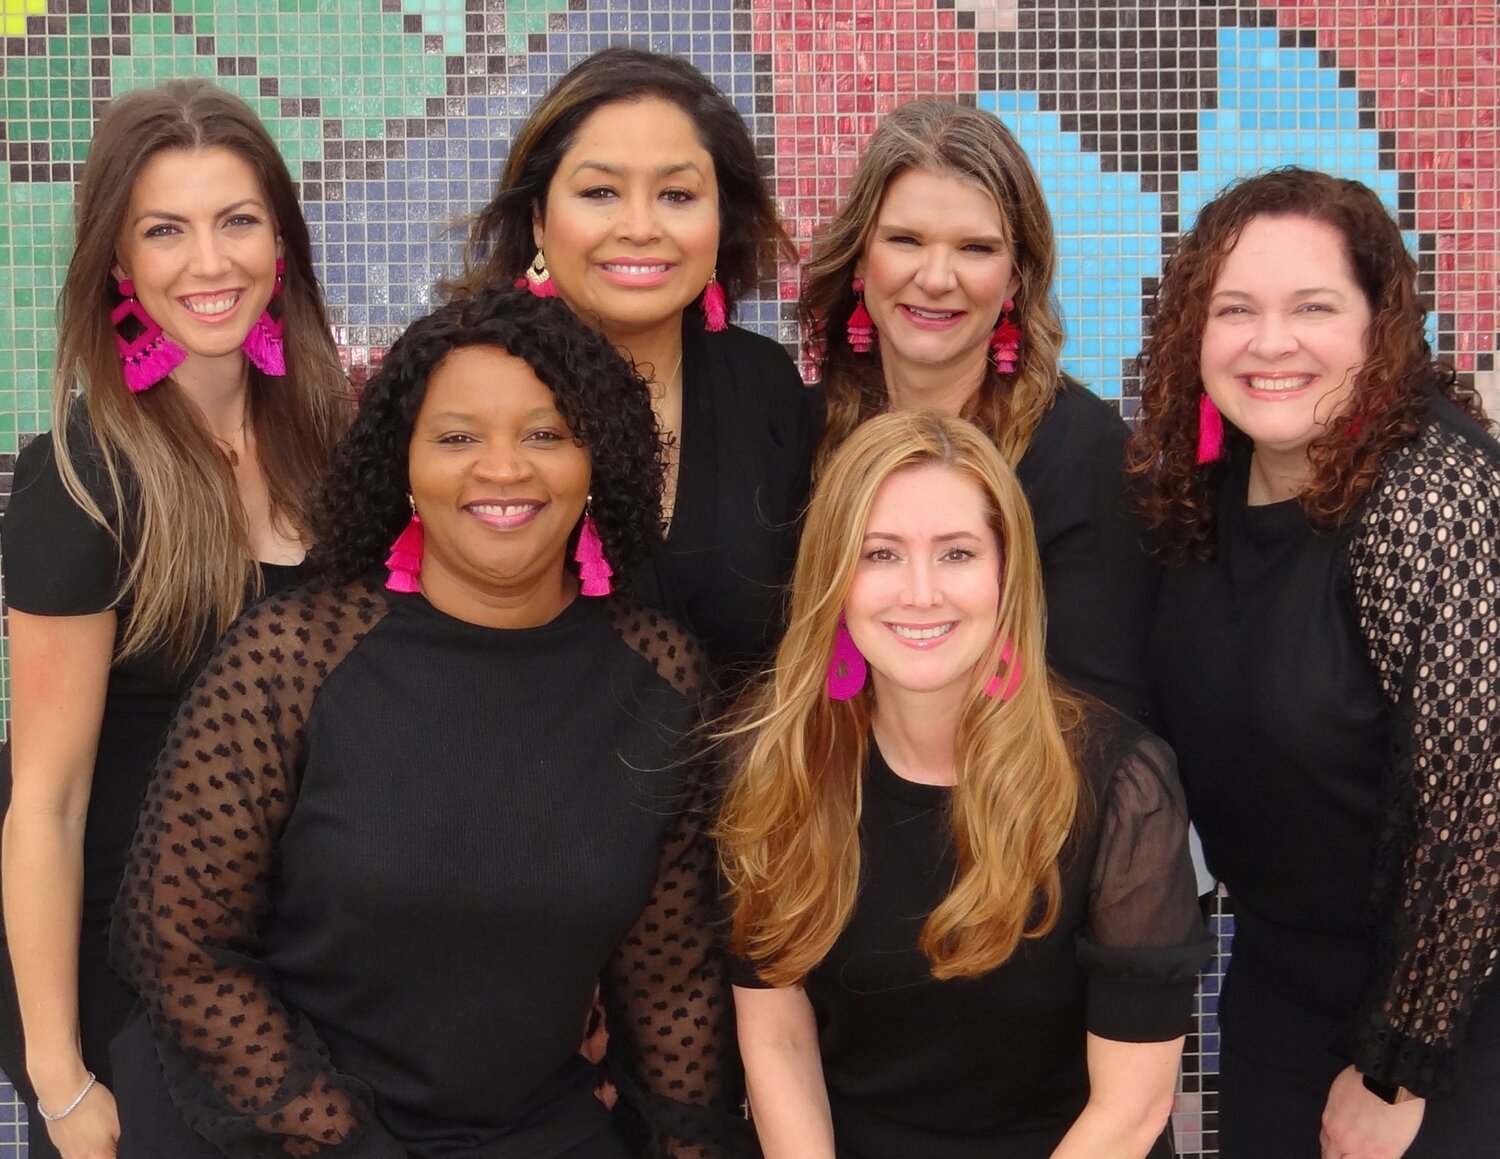 The Fort Bend Junior Service League announced its 2023 Sugar Plum Market co-chairs. Pictured are, front row left to right, Monica Hasty and Cherie Lyne Bouterie, and back row left to right, Candace Amini, Michelle Monterroso, Holly Barker and Andi Wallis.